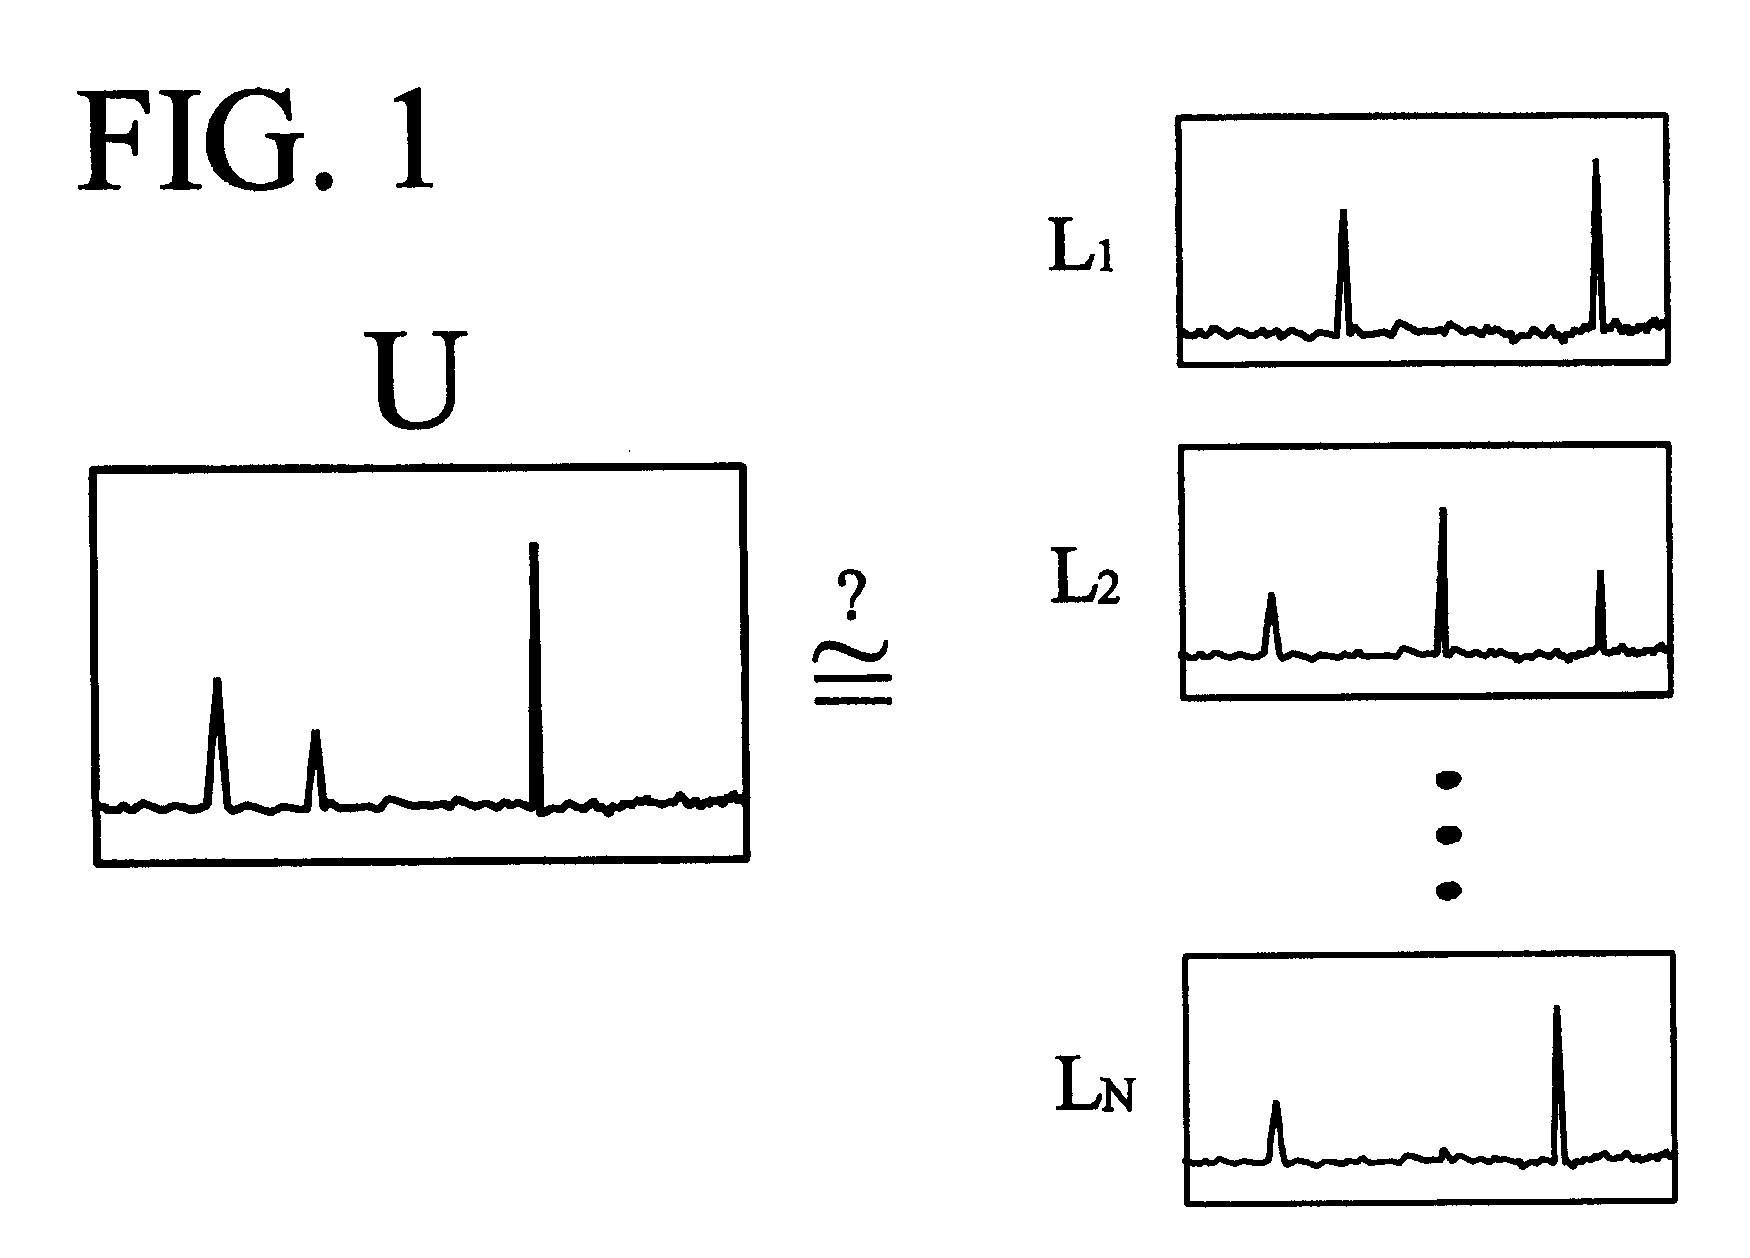 Efficient spectral matching,  particularly for multicomponent spectra